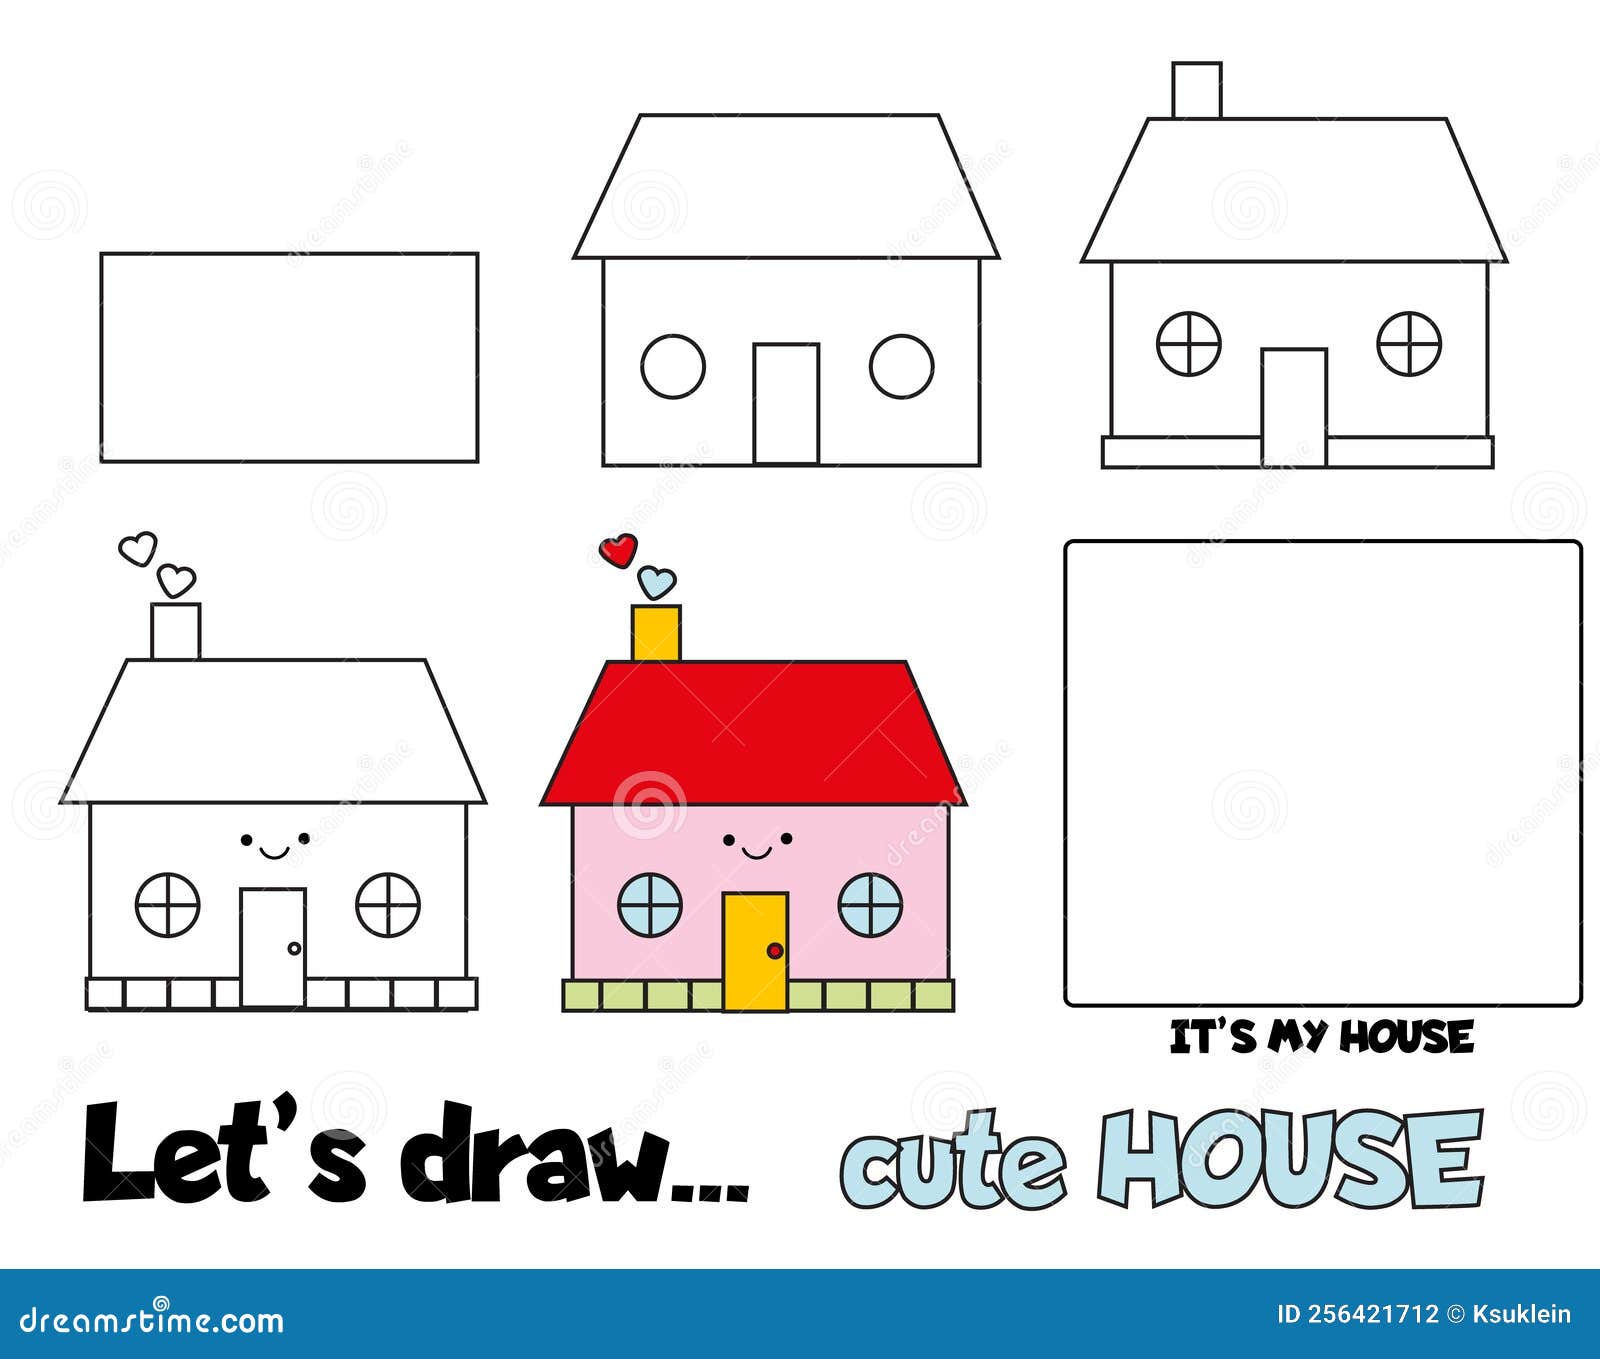 Easy House Drawing Tutorial | Drawing For Kids - YouTube